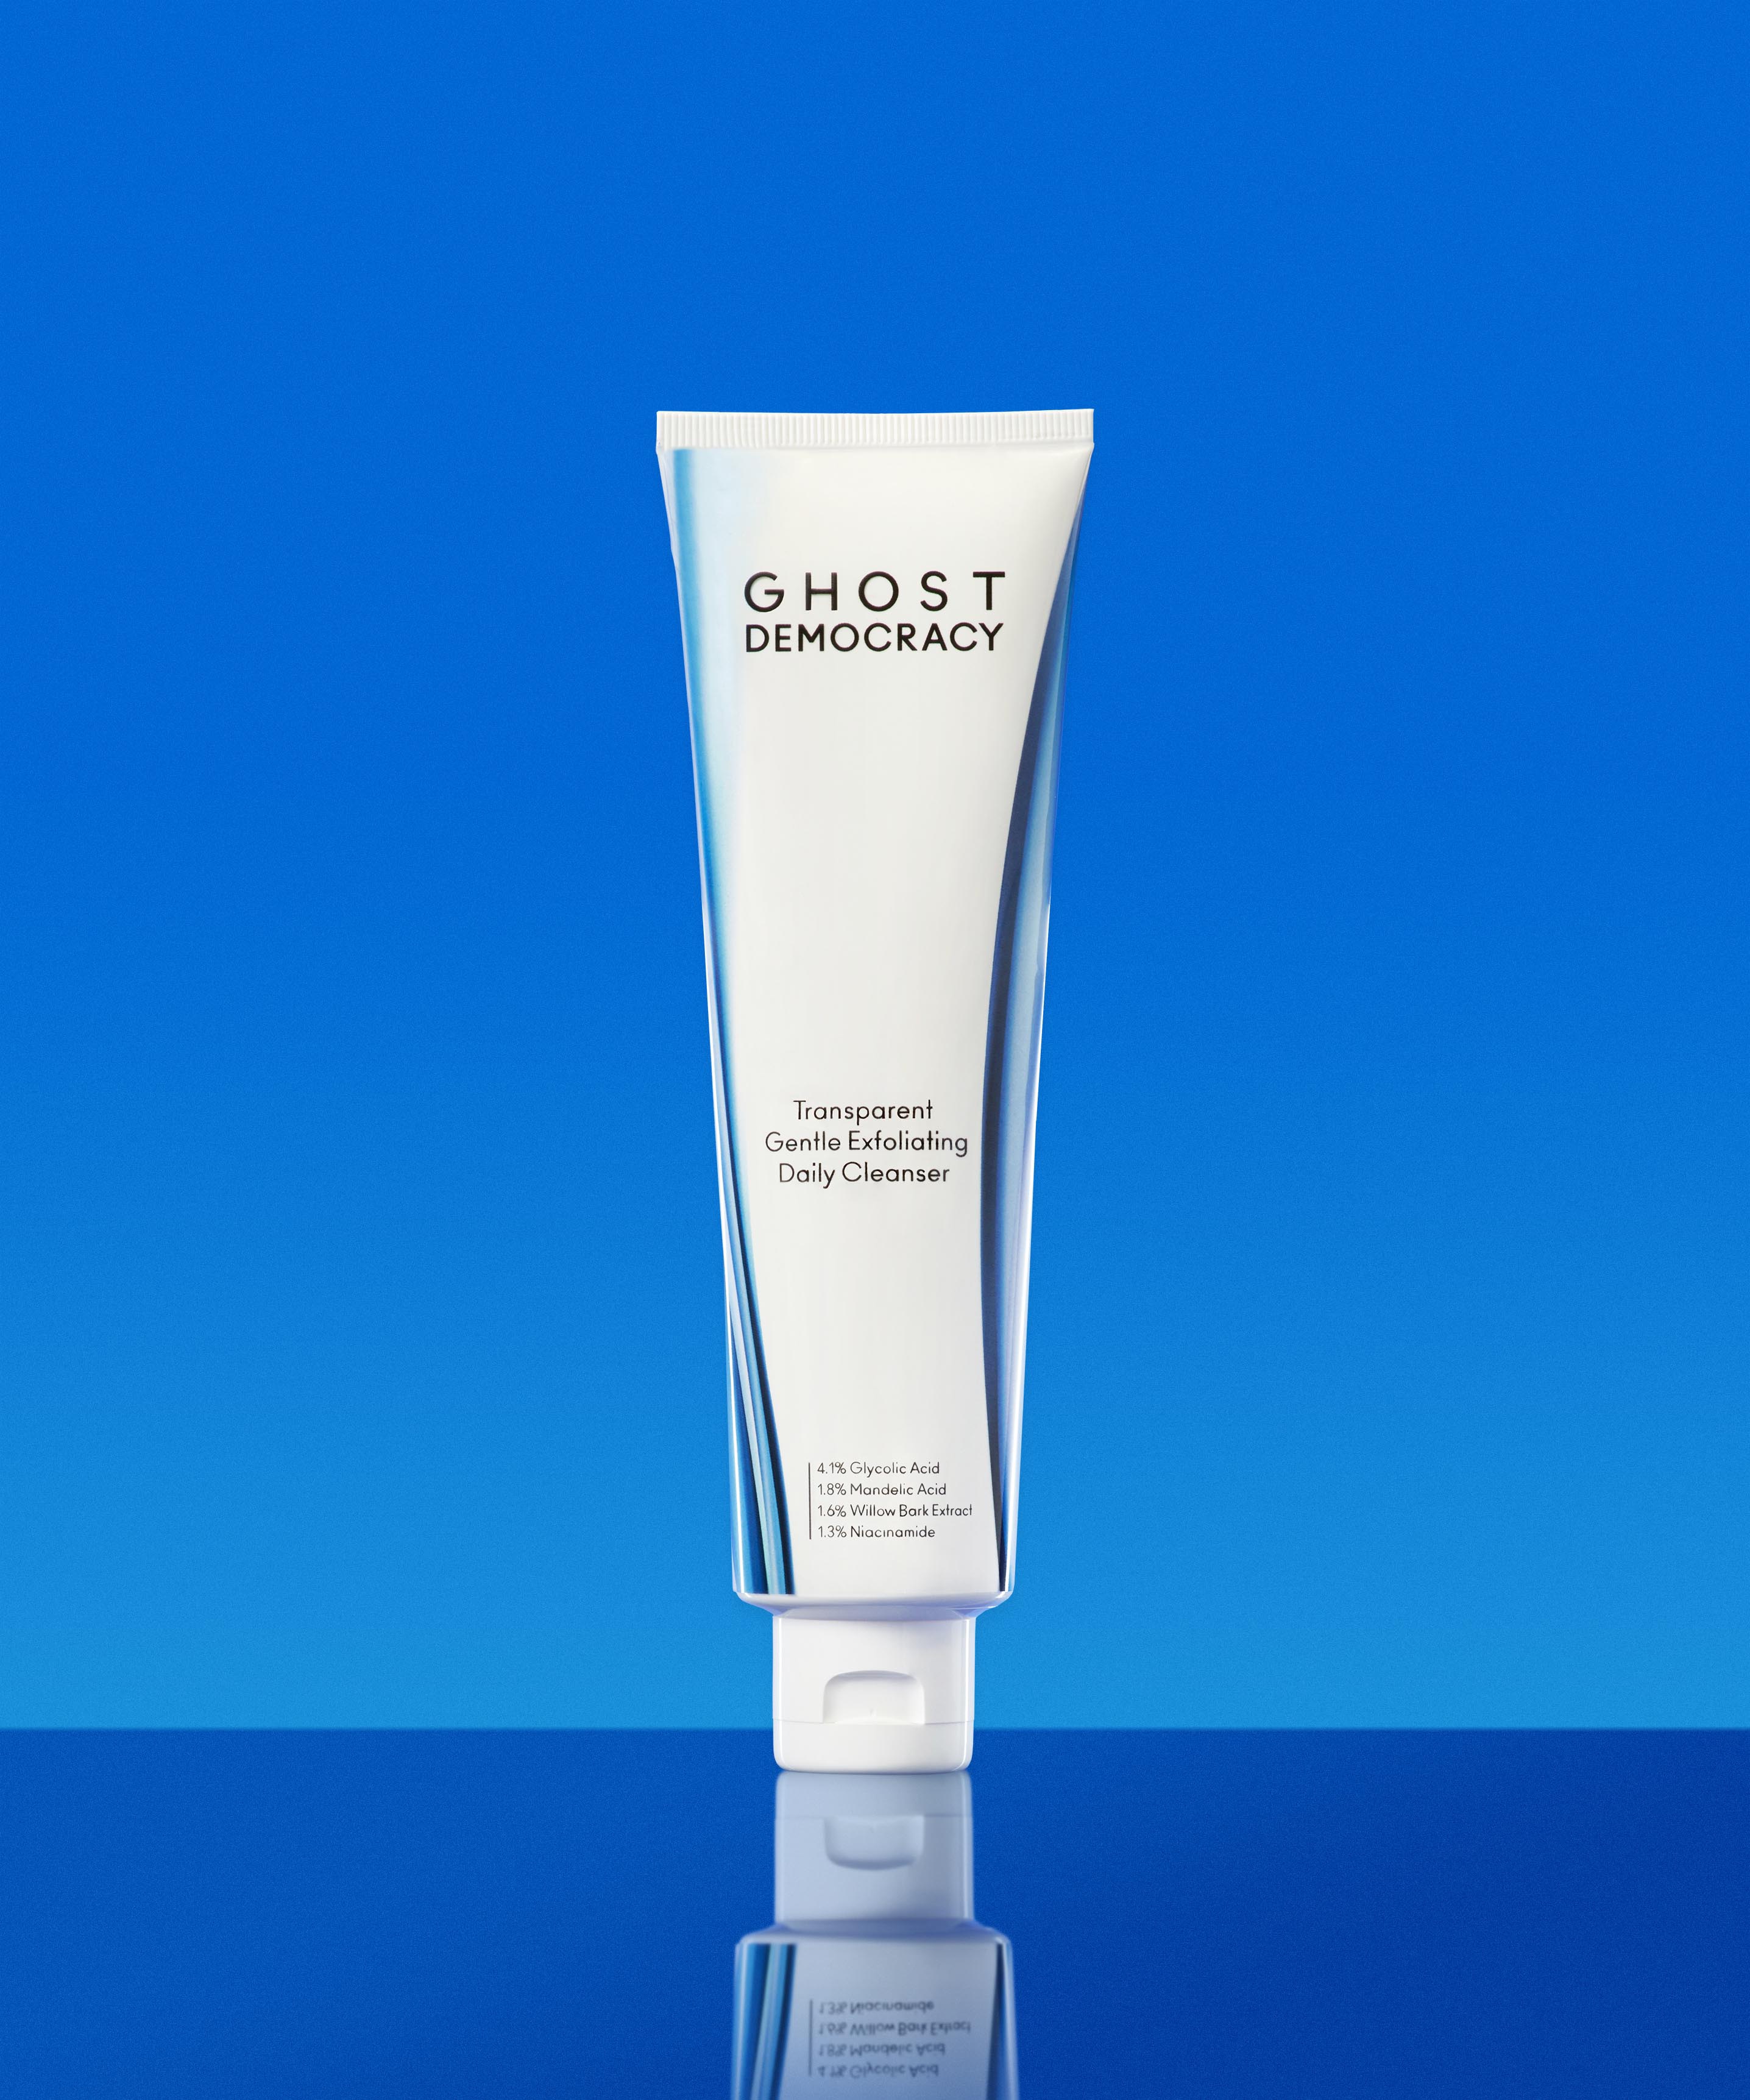 Ghost Democracy Transparent Gentle Exfoliating Daily Cleanser